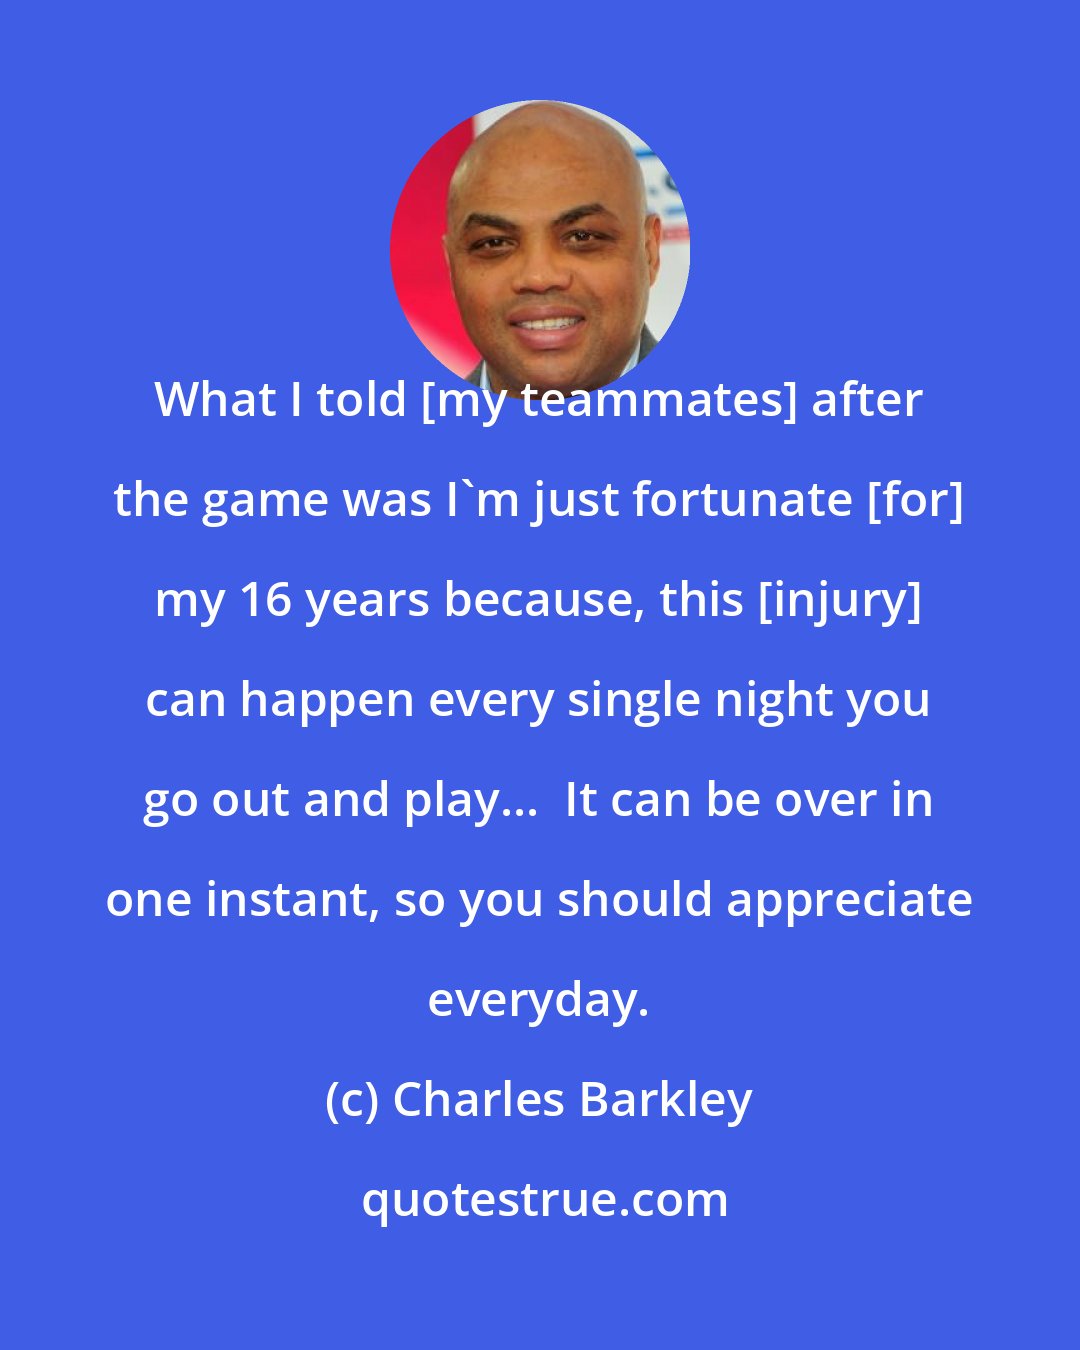 Charles Barkley: What I told [my teammates] after the game was I'm just fortunate [for] my 16 years because, this [injury] can happen every single night you go out and play...  It can be over in one instant, so you should appreciate everyday.